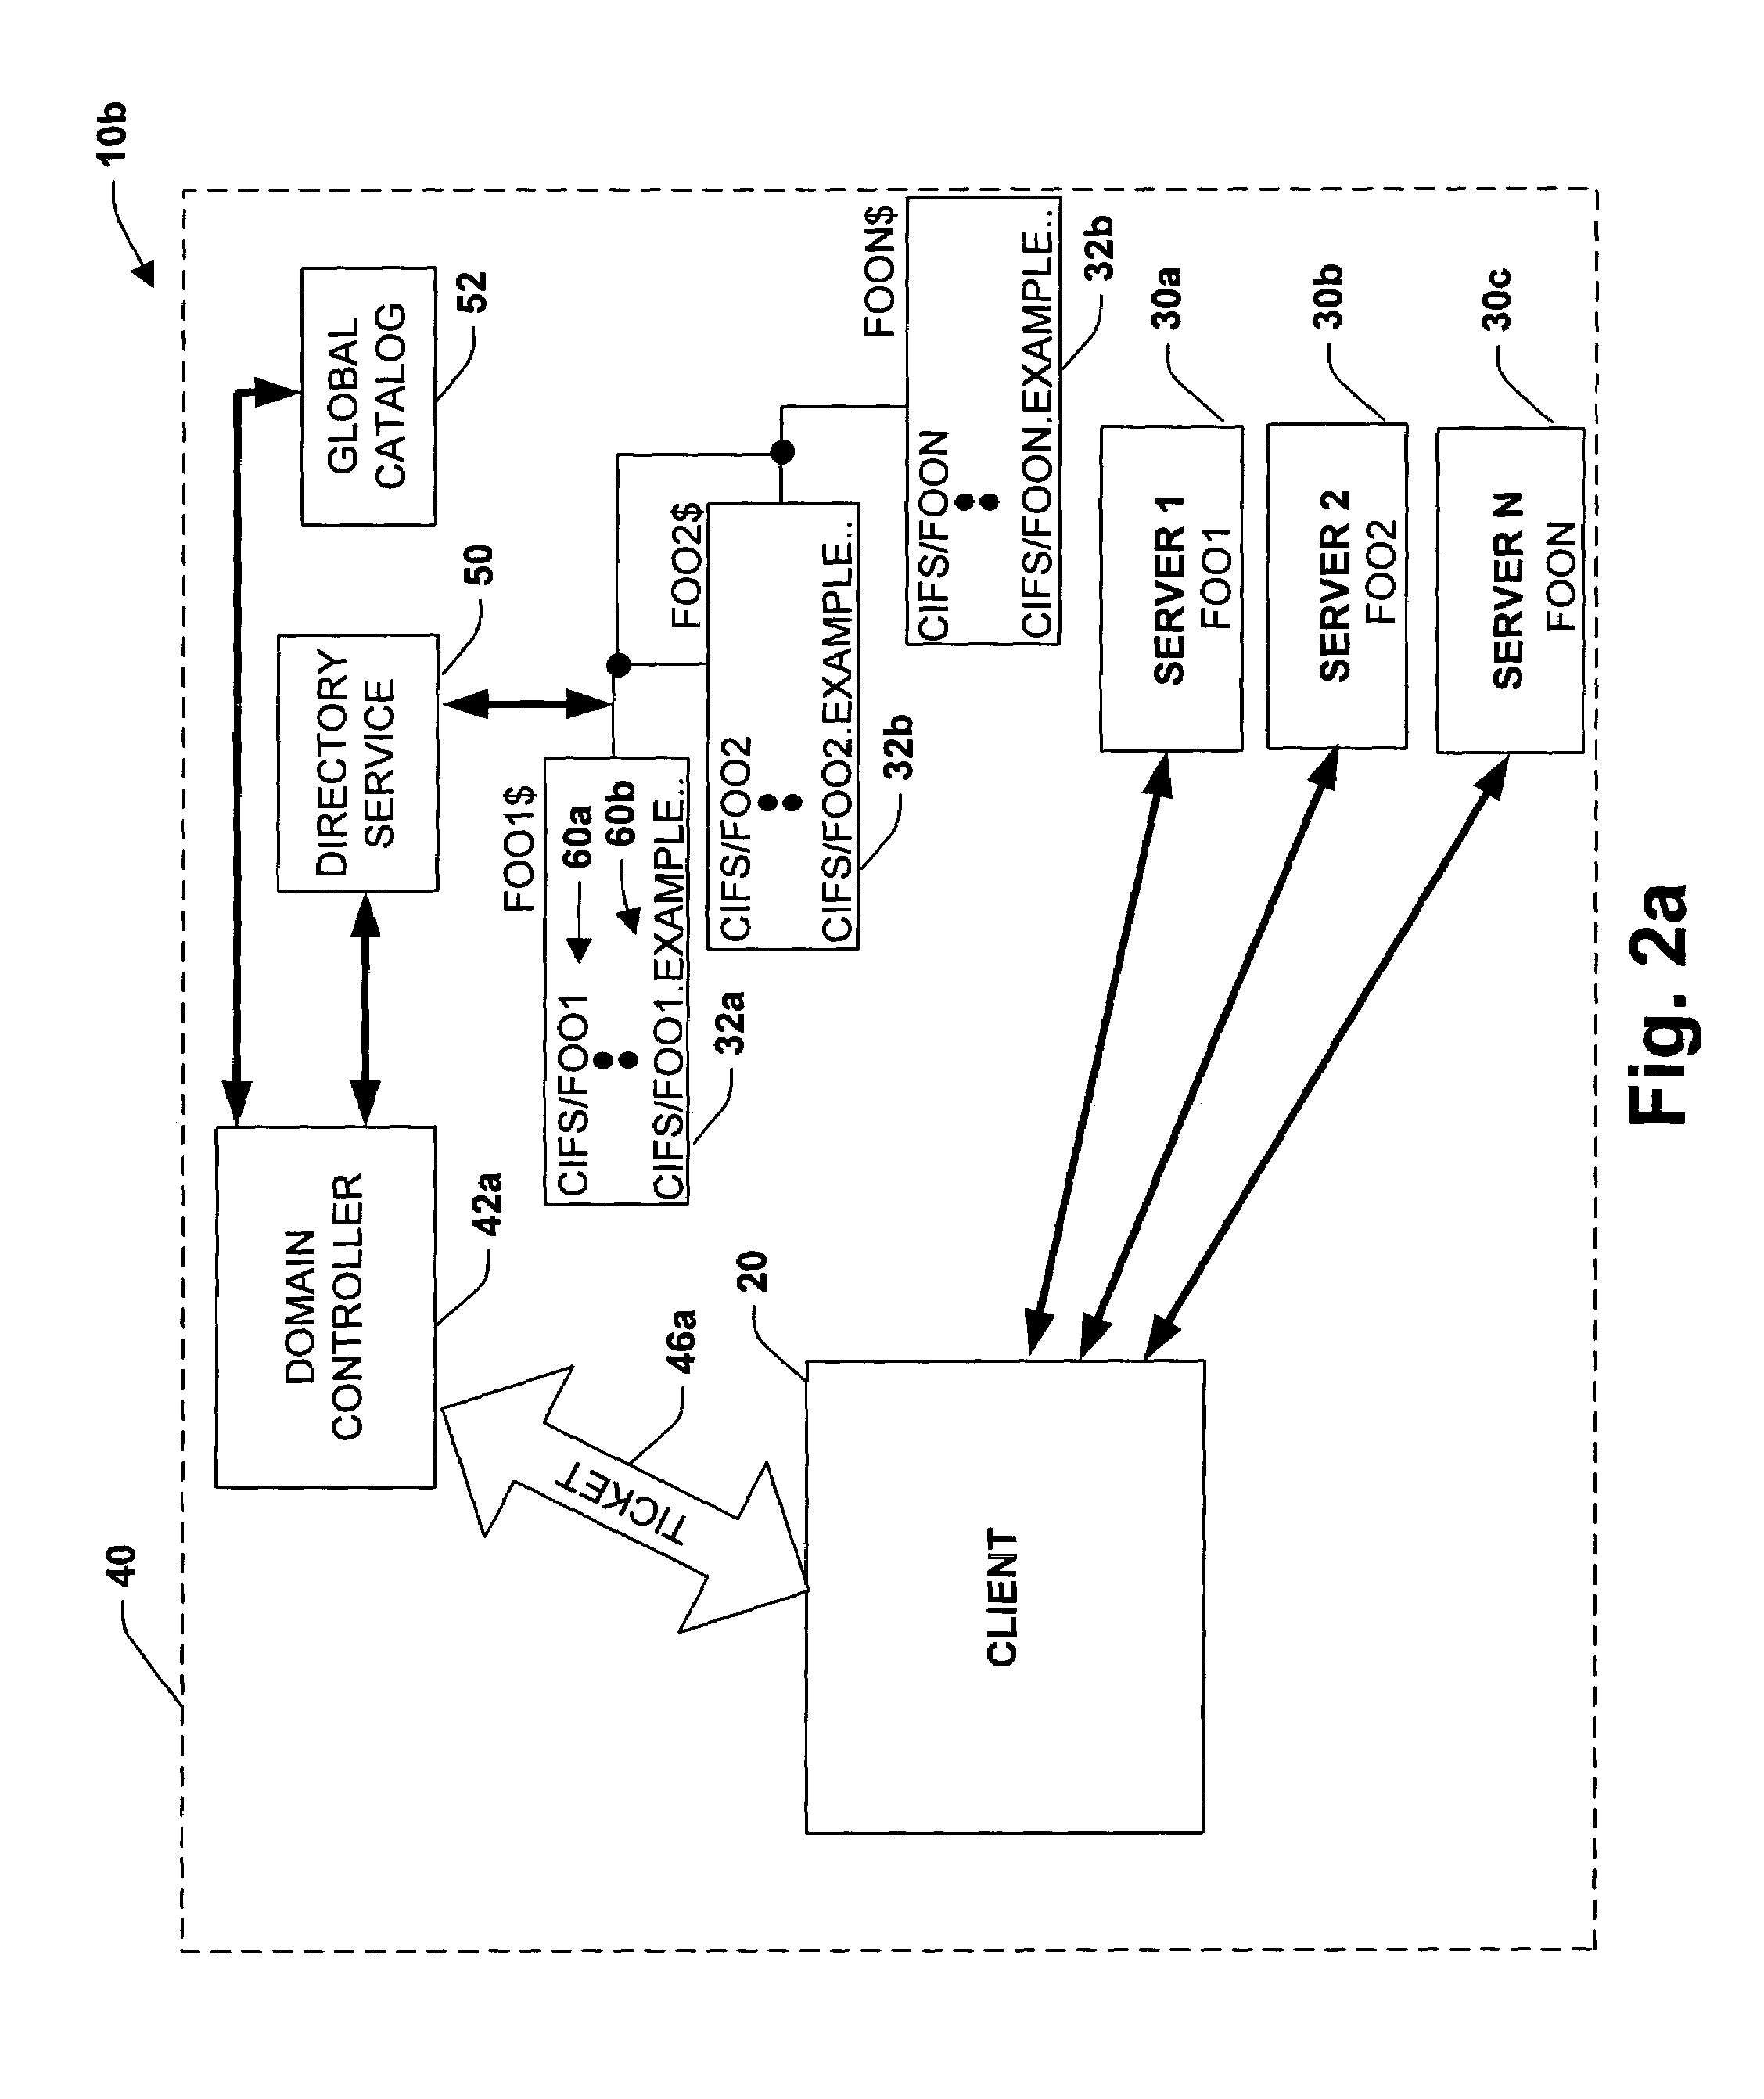 System and method for managing and authenticating services via service principal names